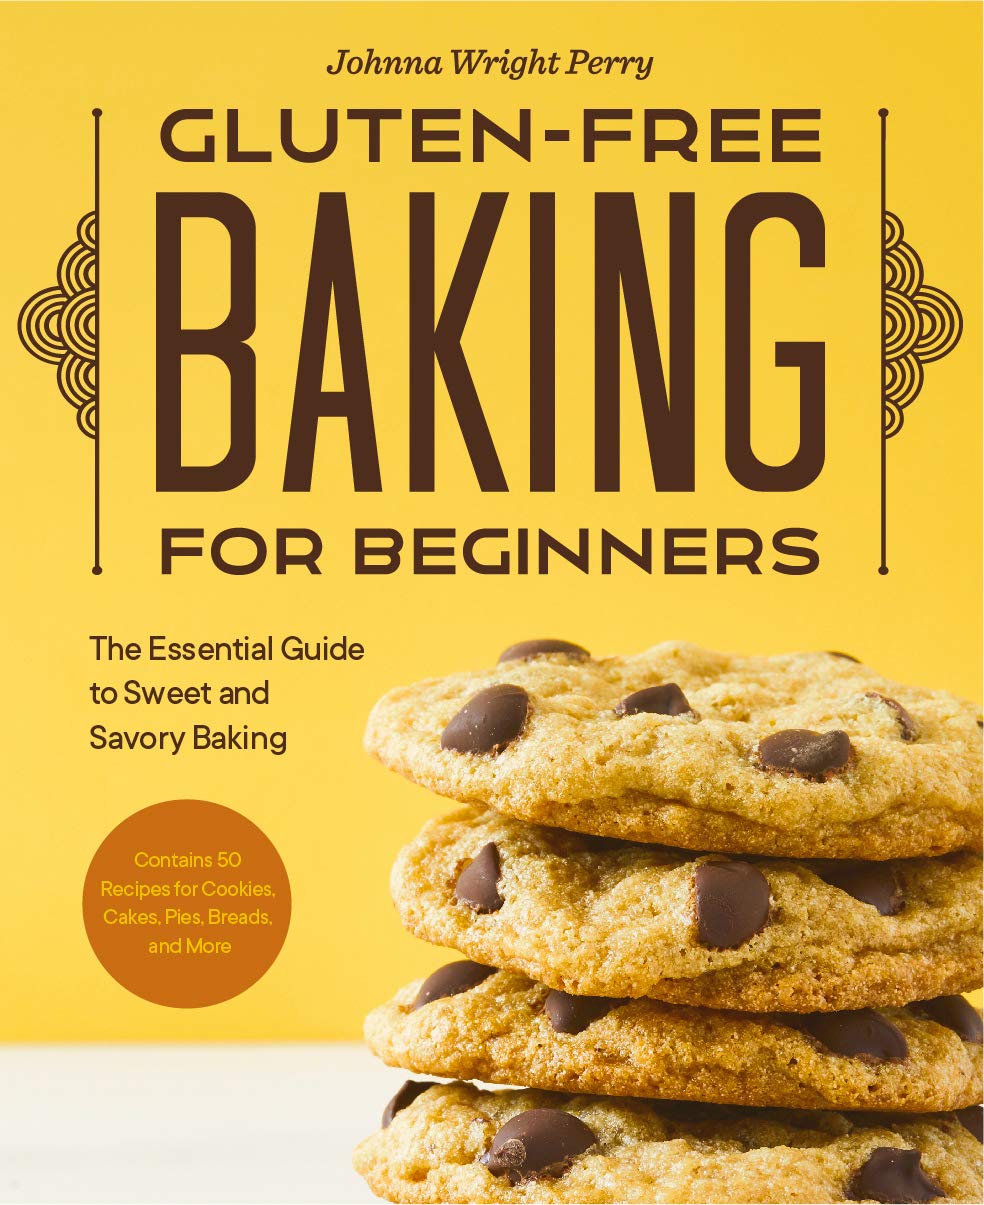 Gluten-Free Baking for Beginners: The Essential Guide to Sweet and Savory Baking (Johnna Wright Perry)